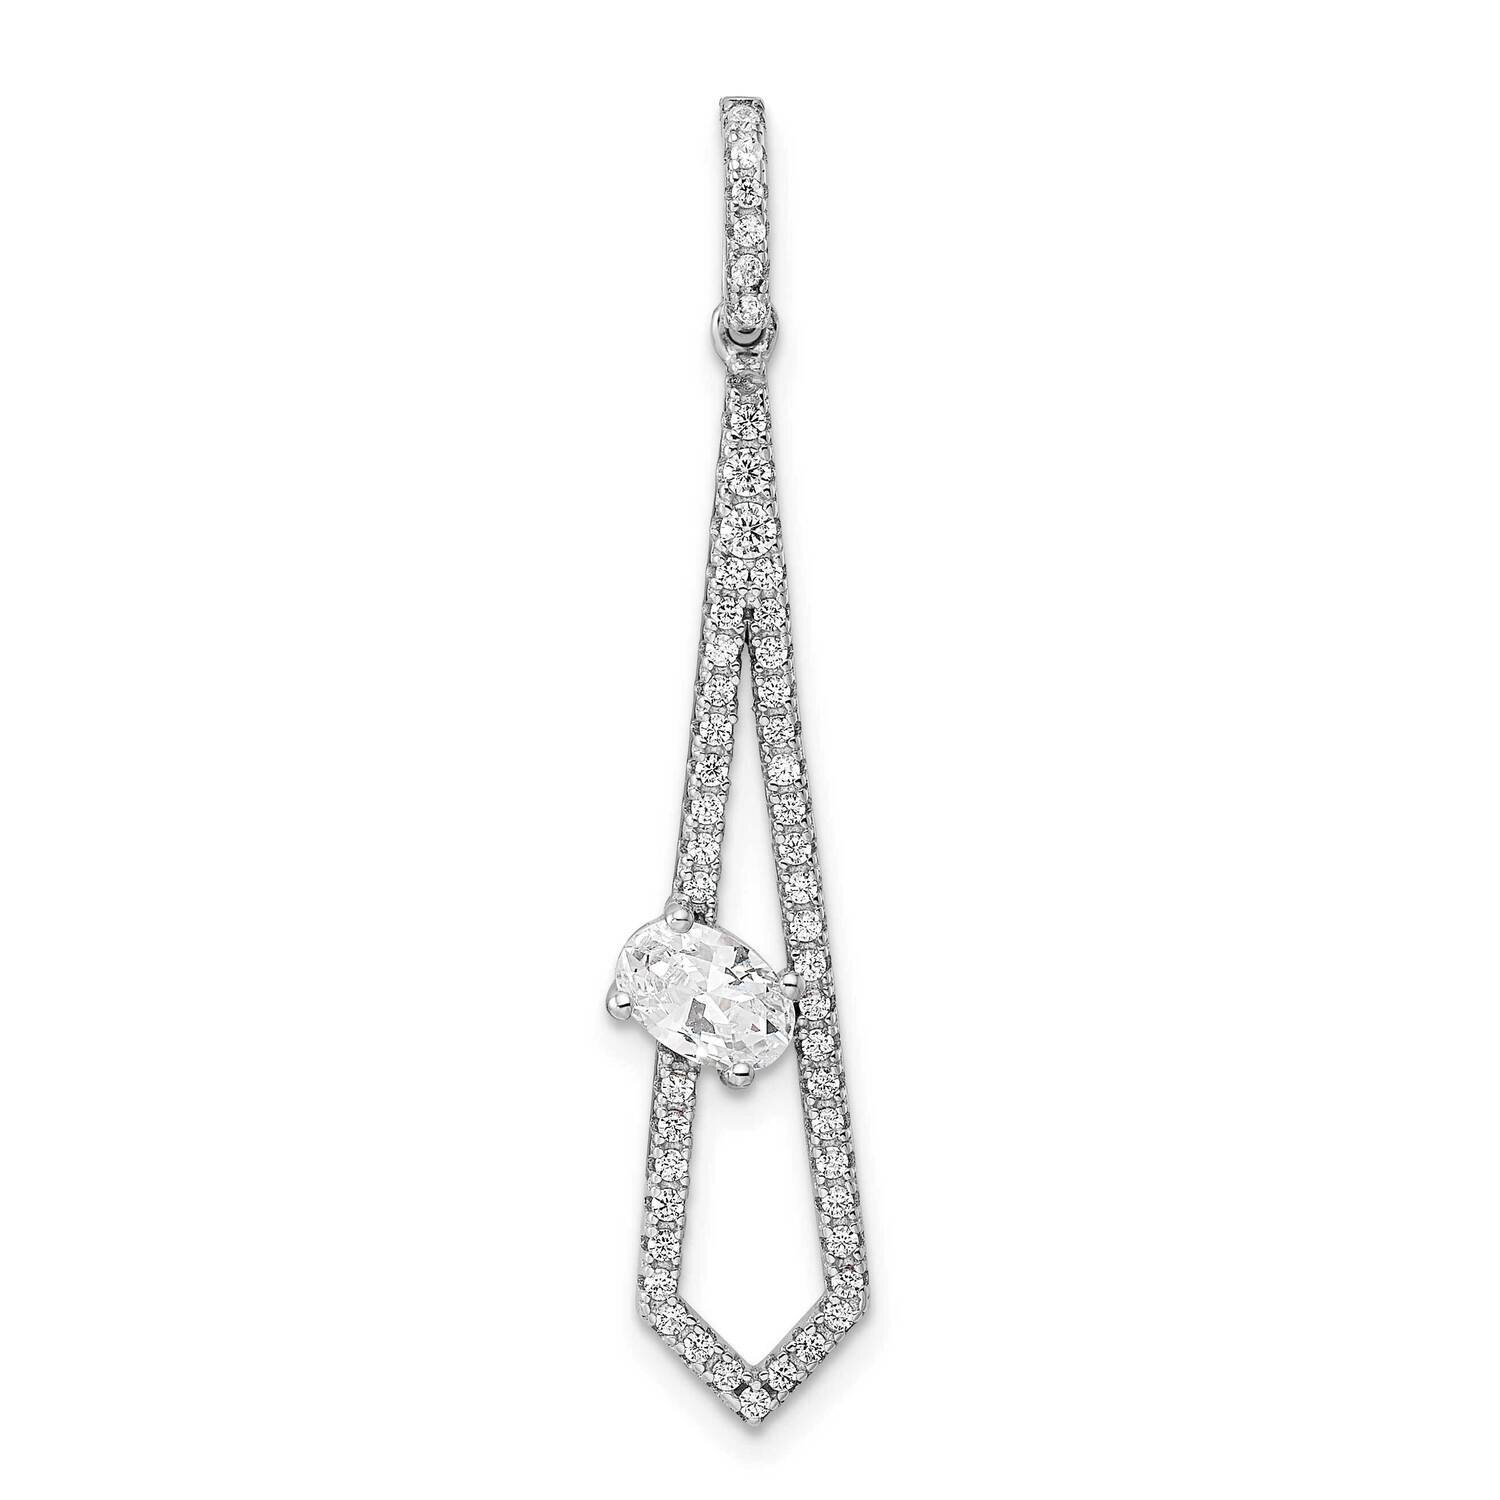 Fancy CZ Diamond Pendant Sterling Silver Rhodium-Plated Polished QP5458